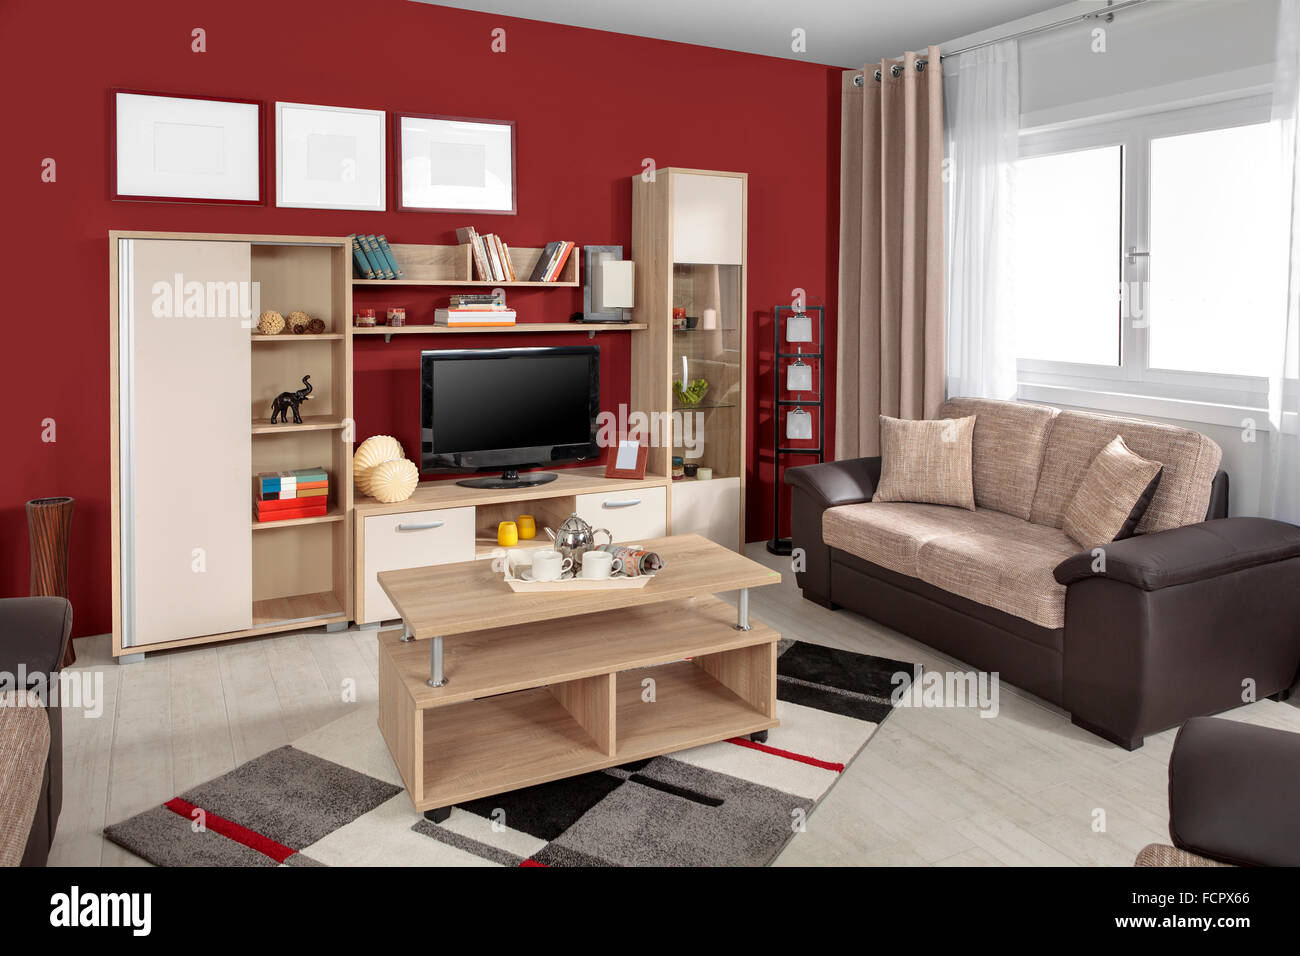 Interior of a modern living room in color Stock Photo